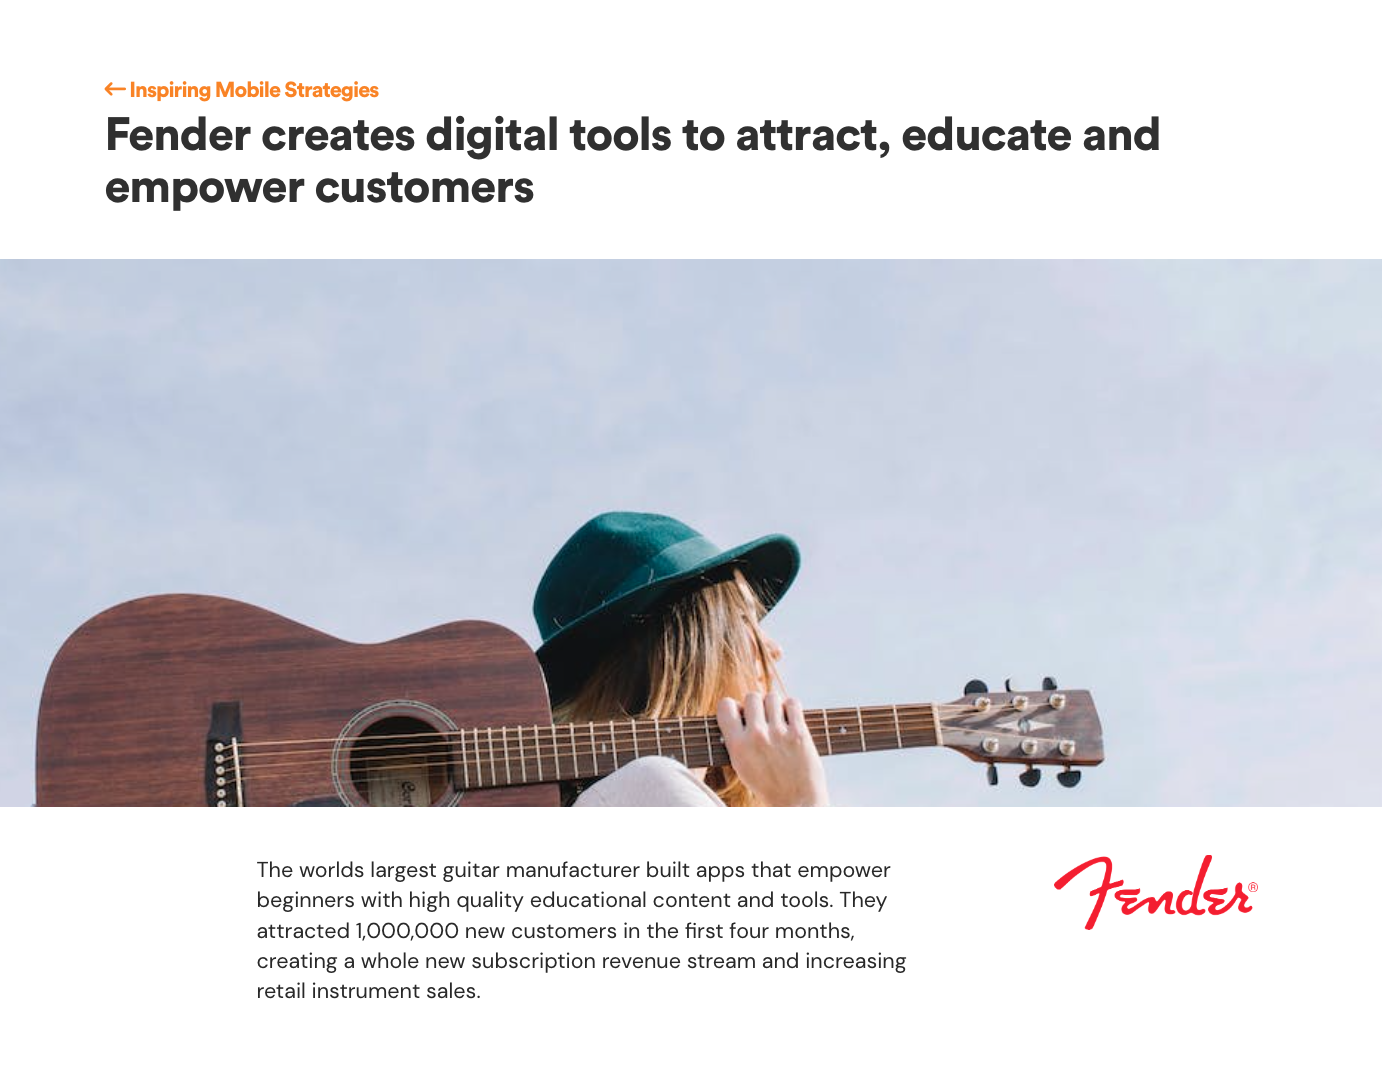 Fender mobile strategy example